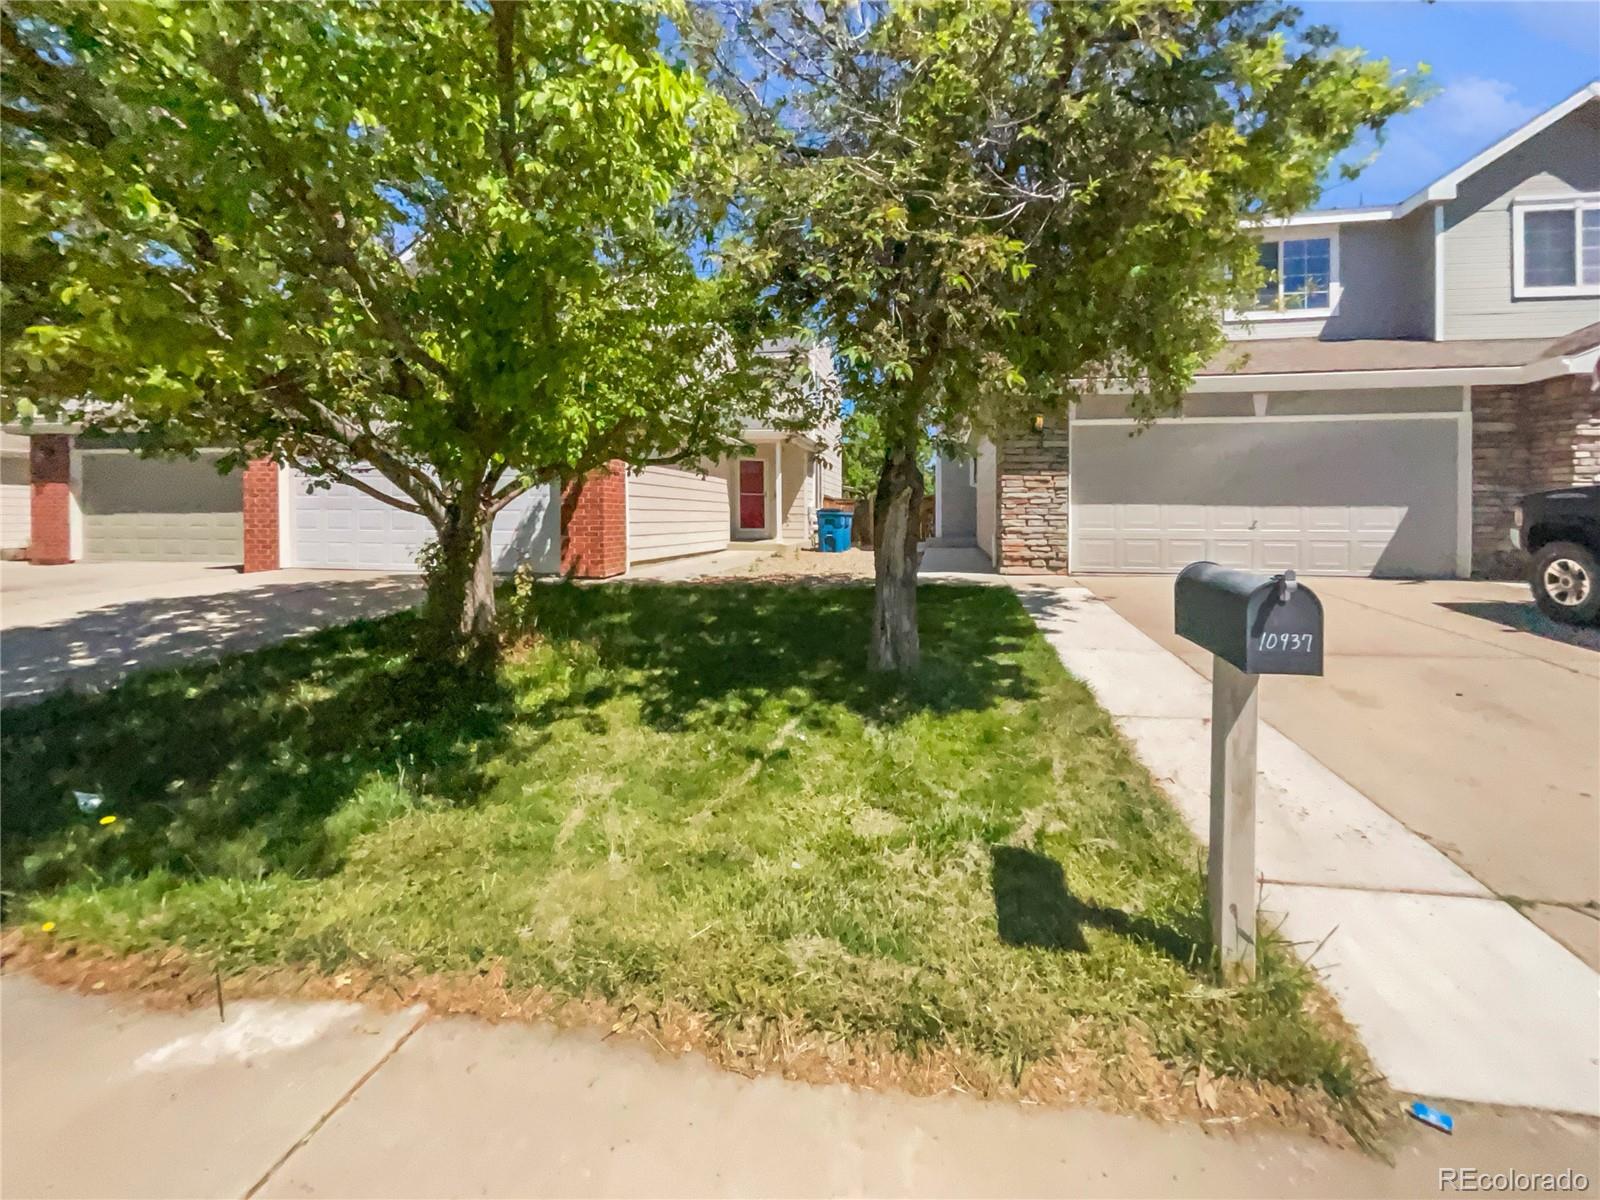 10937 E 96th Place, commerce city MLS: 9665328 Beds: 3 Baths: 3 Price: $450,000